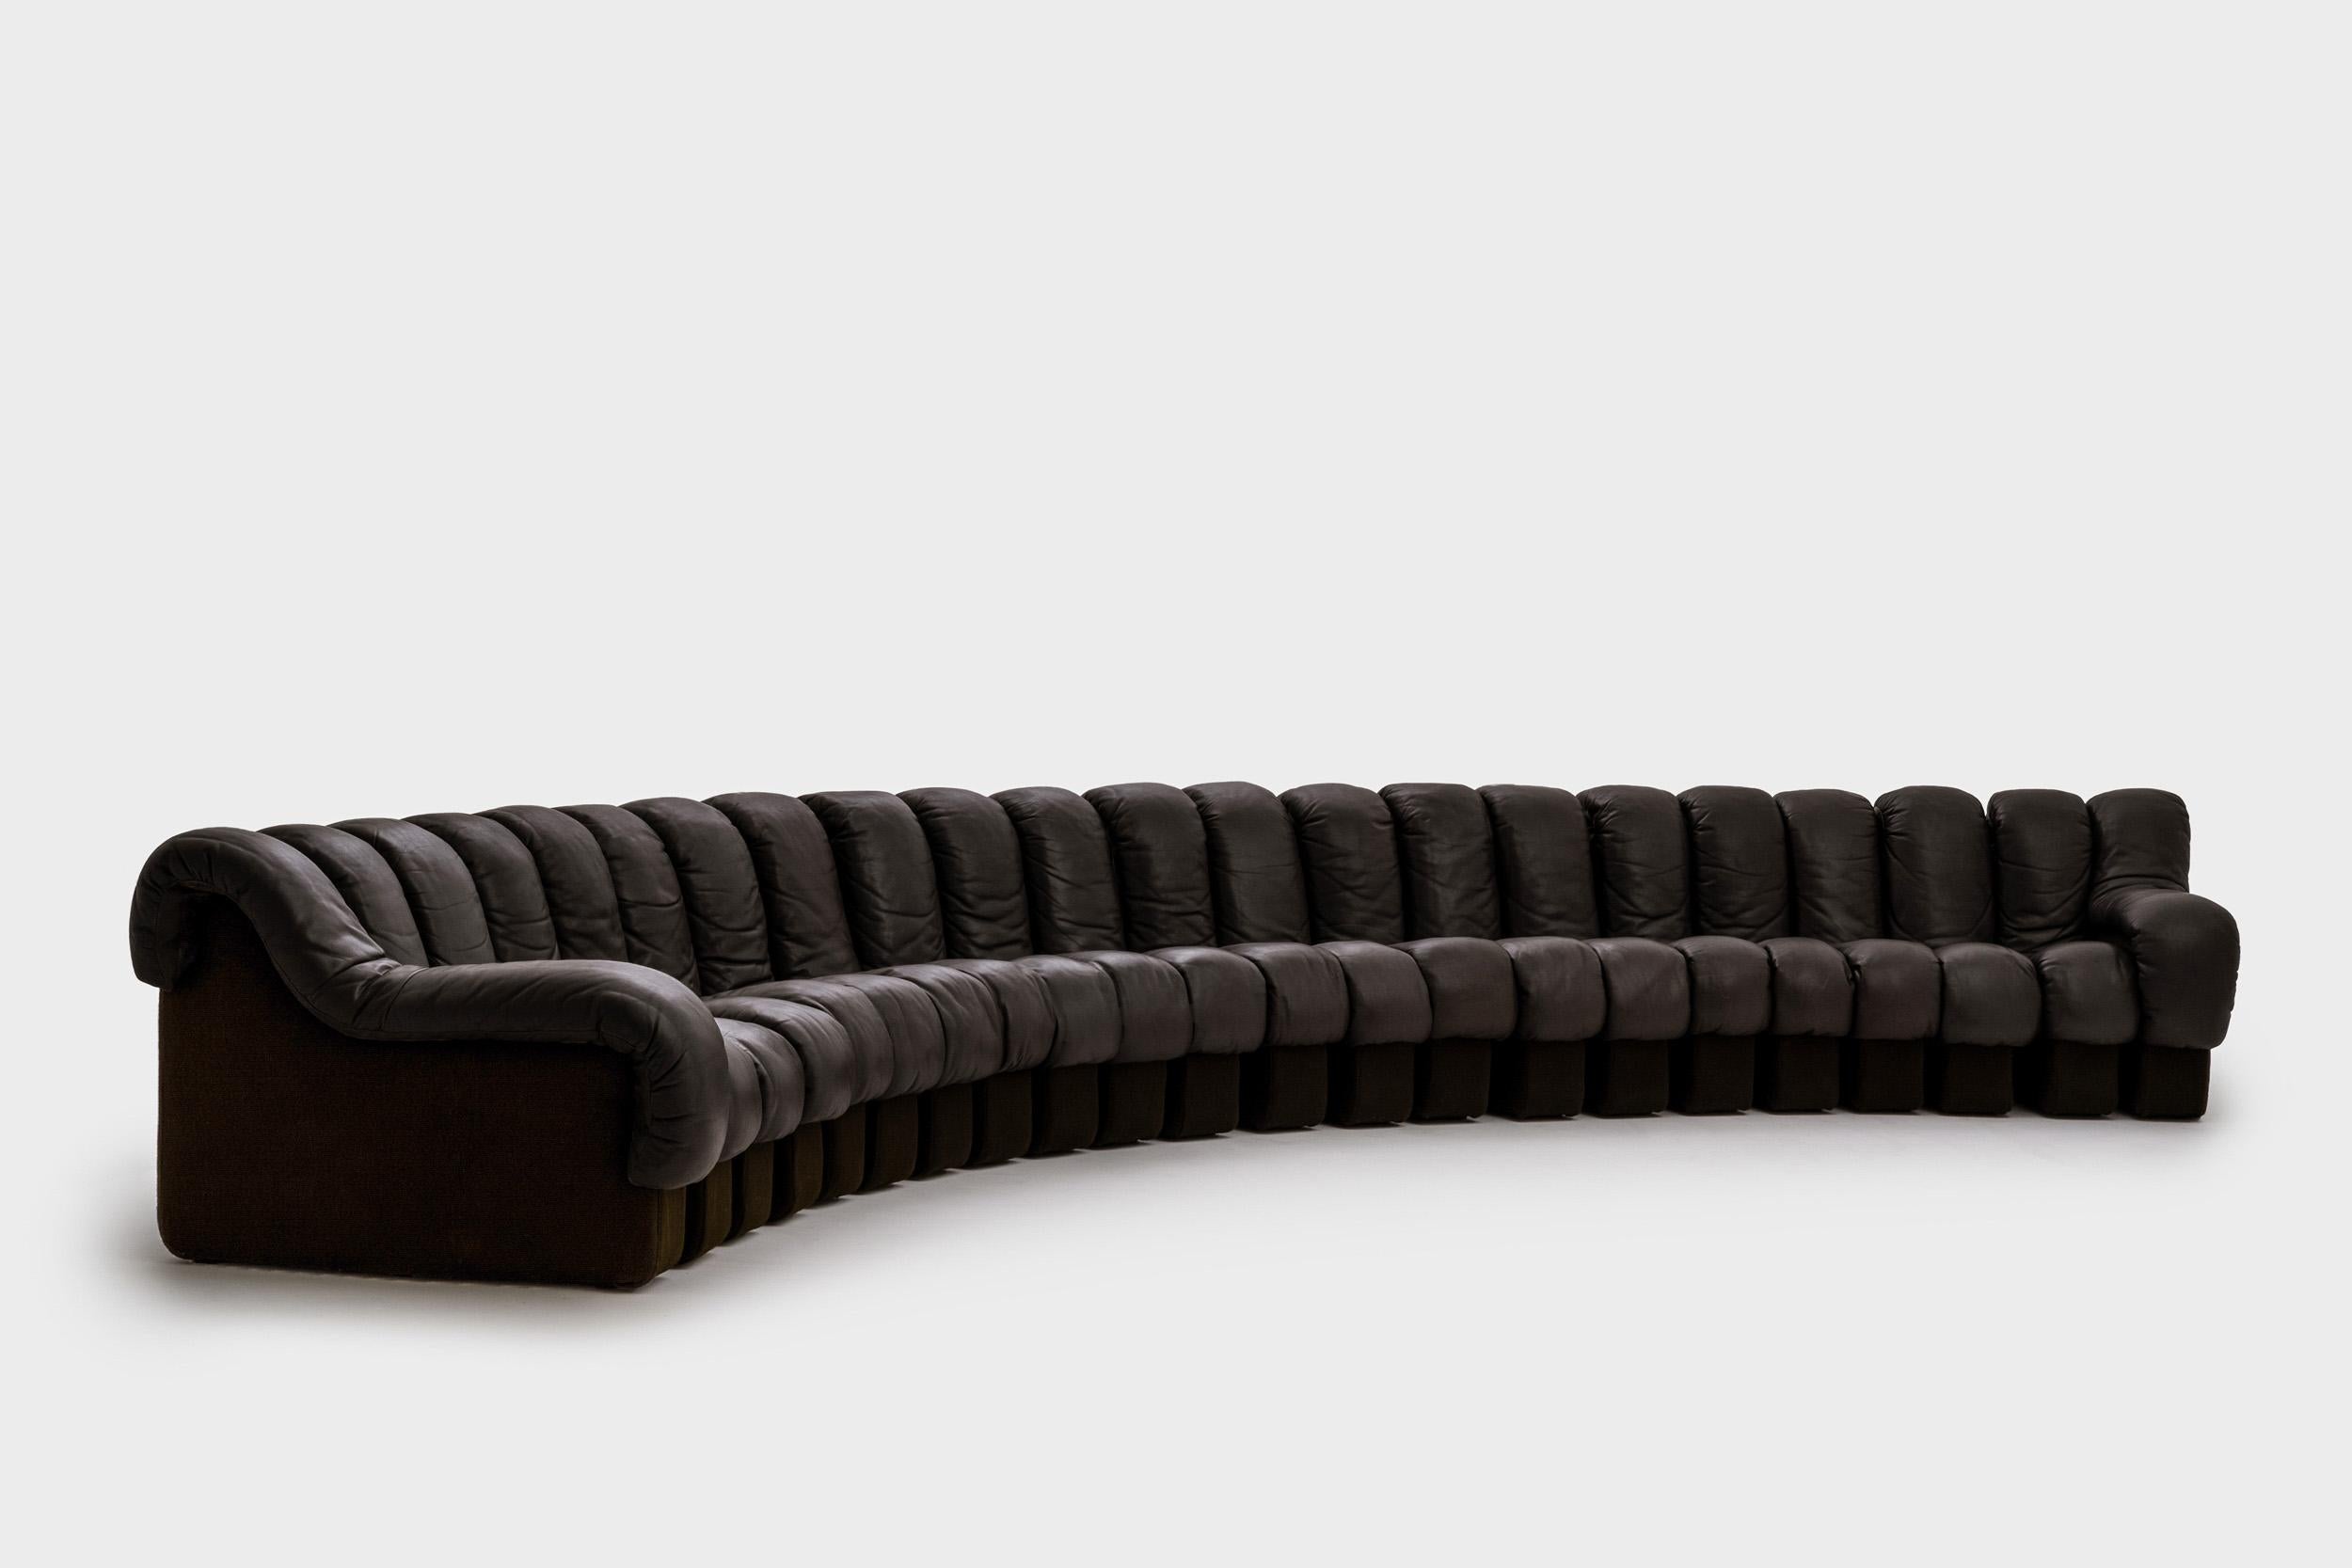 DS600 'Non Stop' sectional sofa by by Ueli bergere, Elenora Peduzzi-Riva, Heinz Ulrich and Klaus Vogt for De Sede, Switzerland 1972. The sofa contains 22 pieces with the original smooth dark 'chocolate' brown leather upholstery with a matching brown